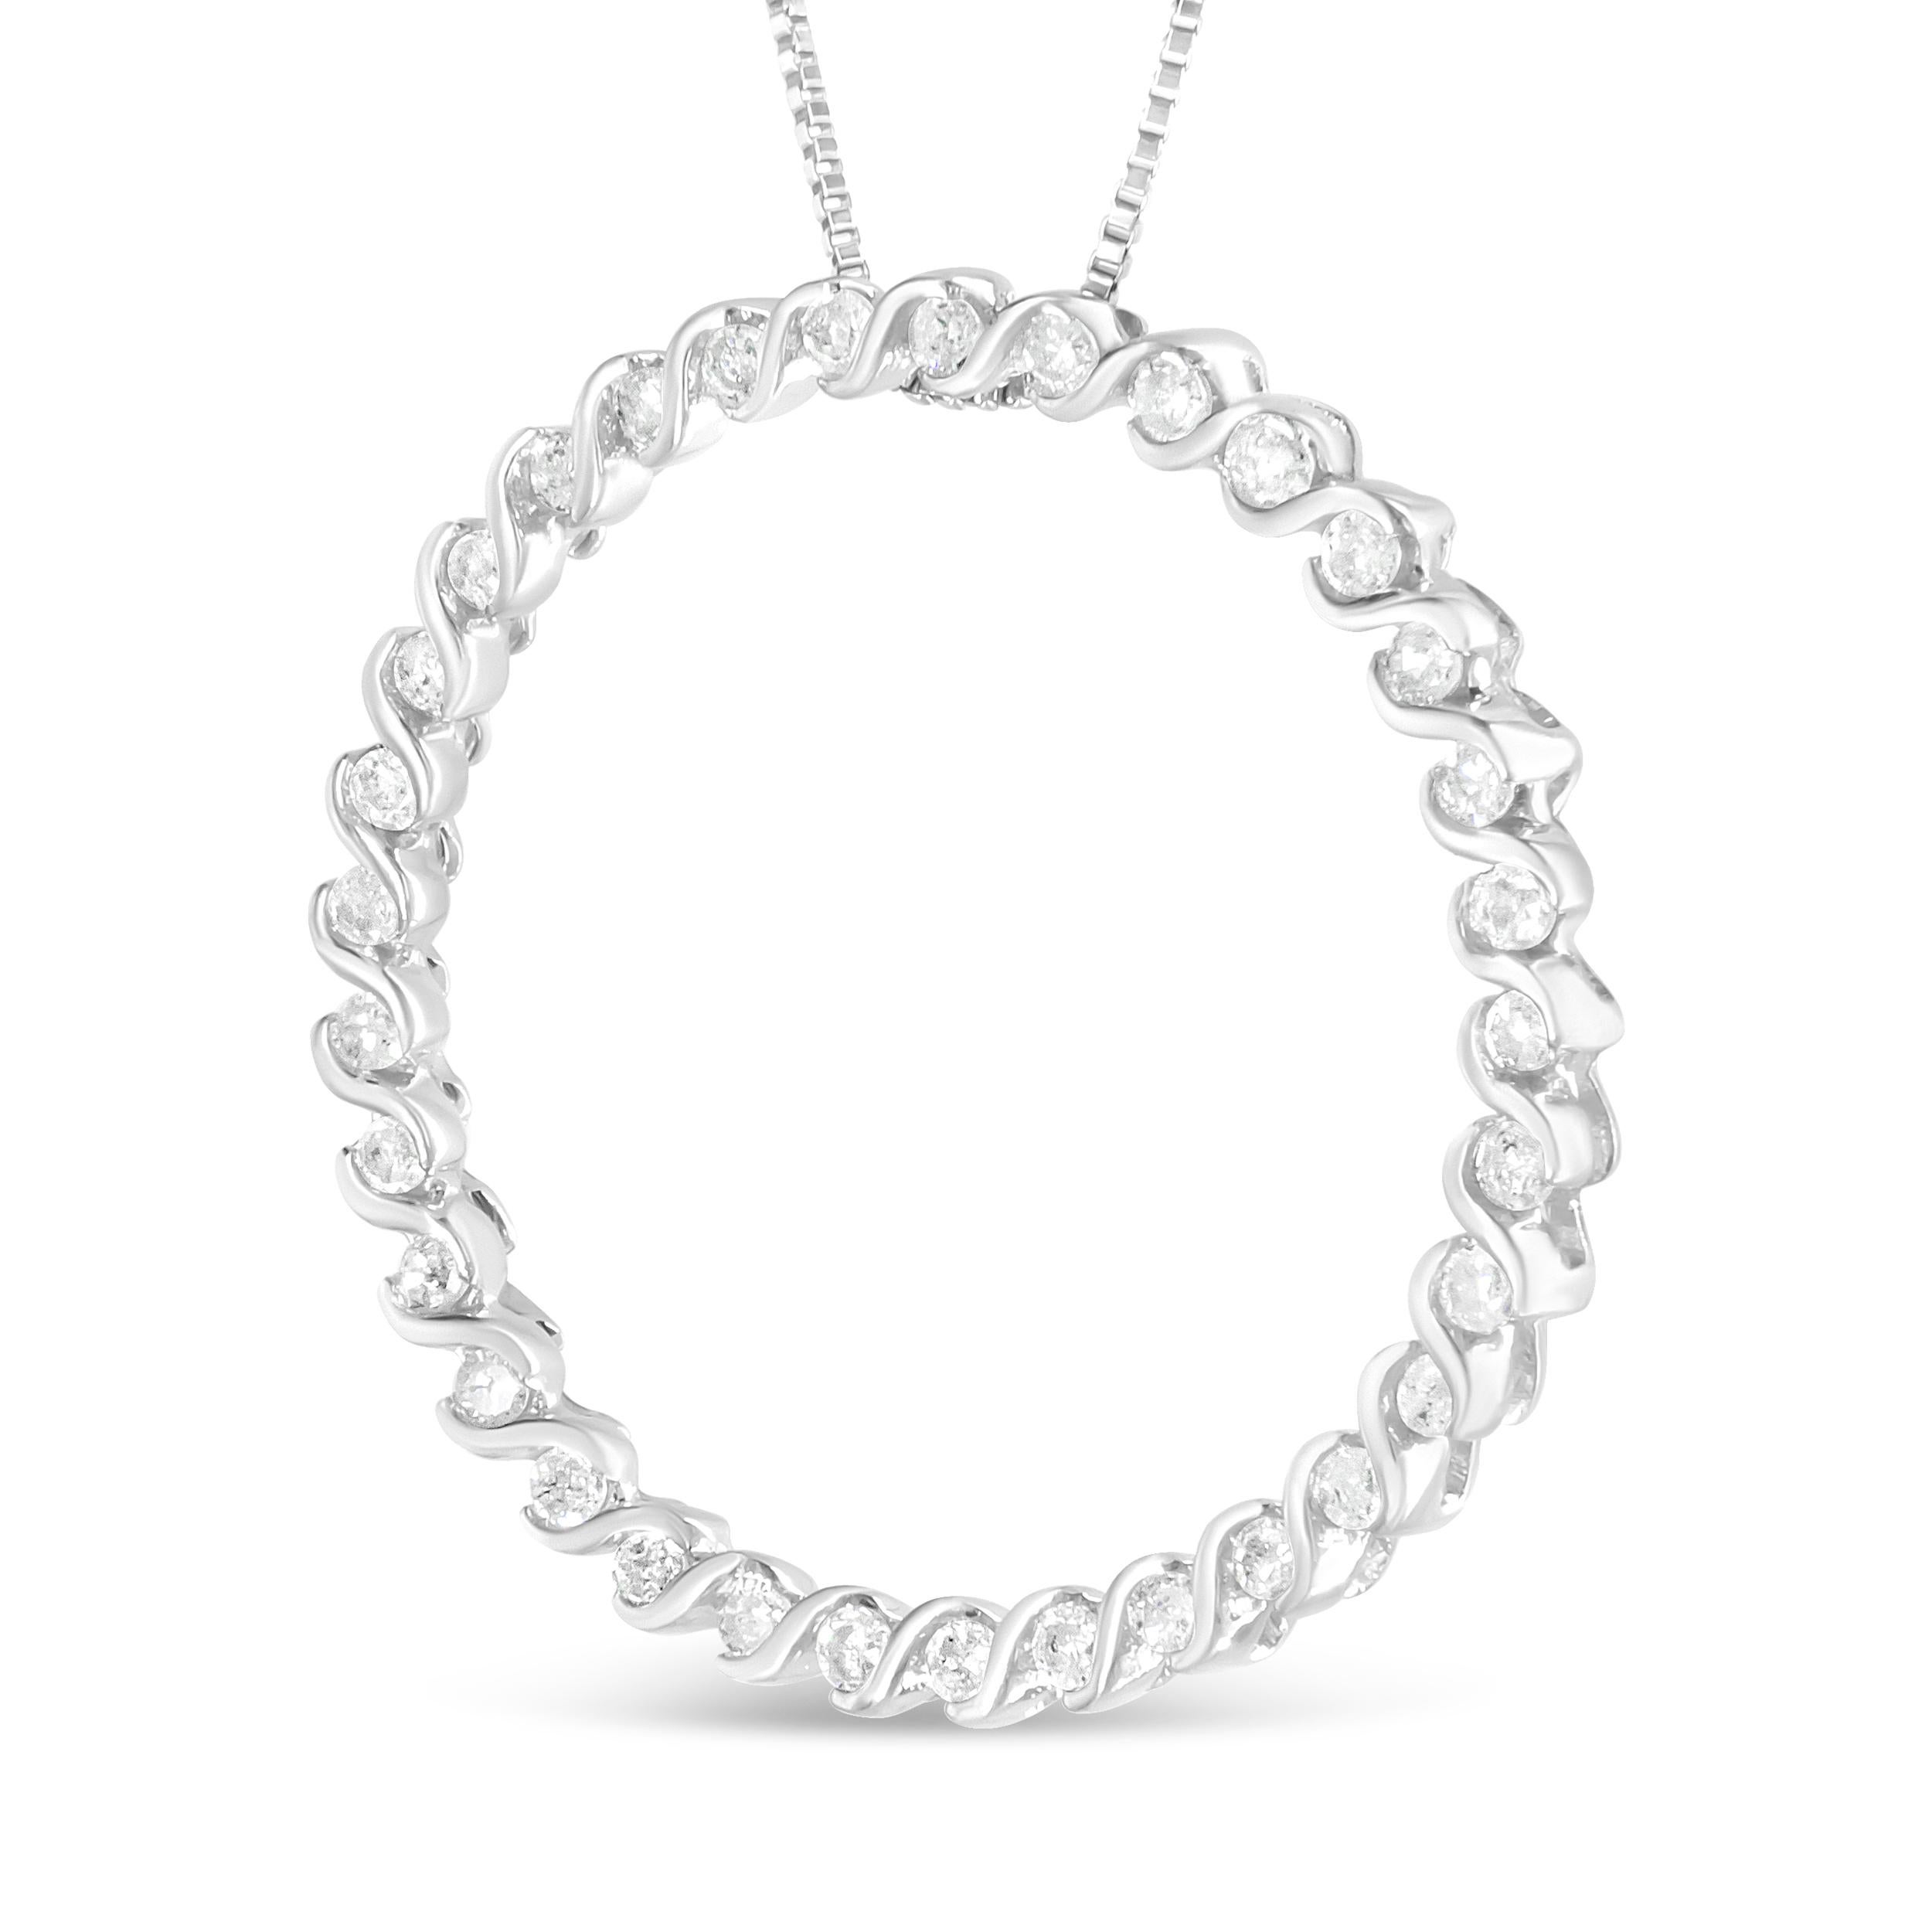 This gorgeous .925 sterling silver pendant necklace brings together love and life full circle with a chic open circle edged by glittering round, prong-set diamonds. The perennial beauty of this necklace makes it the perfect choice to wear for all